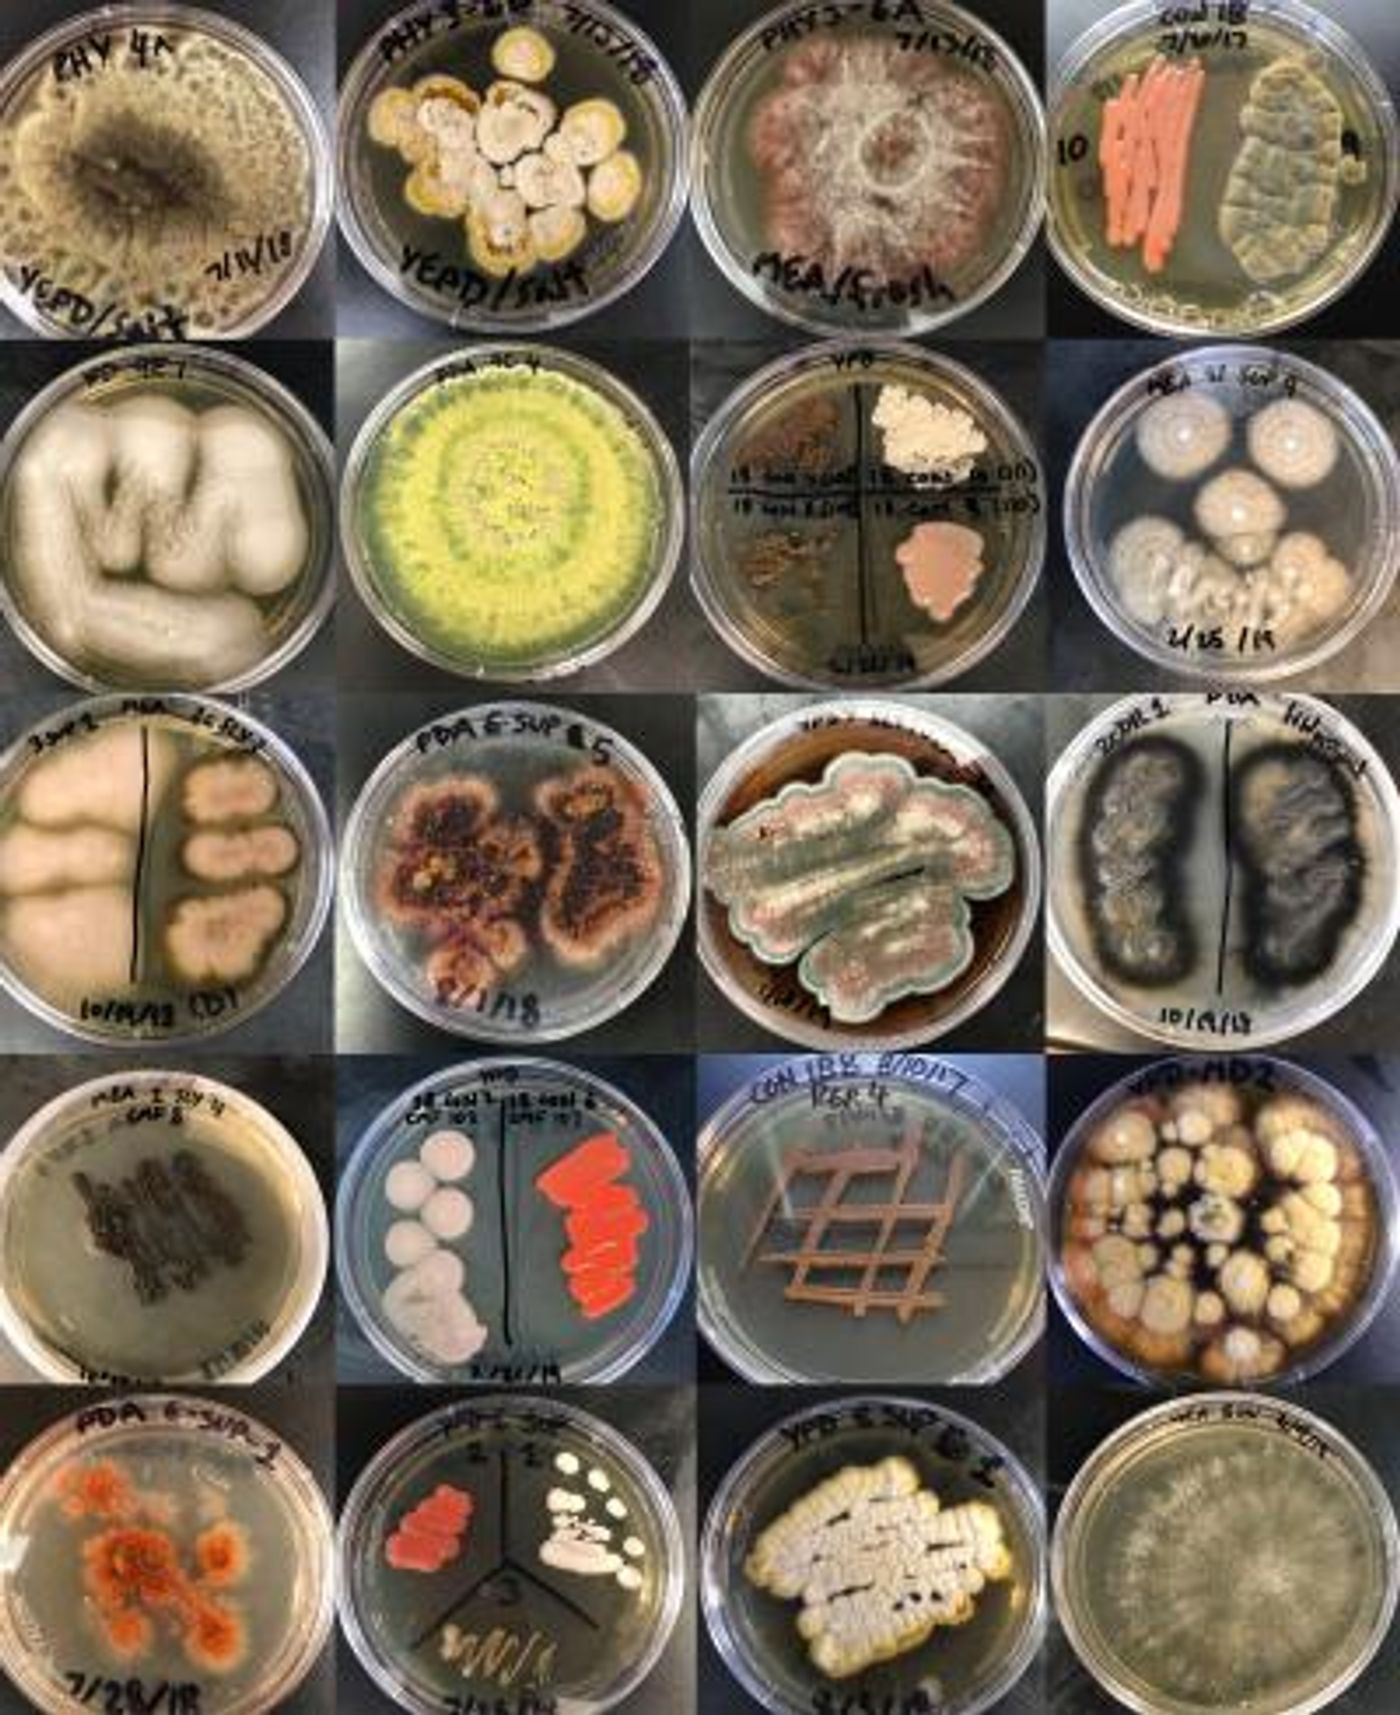 Fungal colonies cultured from samples collected in various marine environments in and around Woods Hole, Massachusetts. / Credit: Lorna M.Y. Mitchison-Field